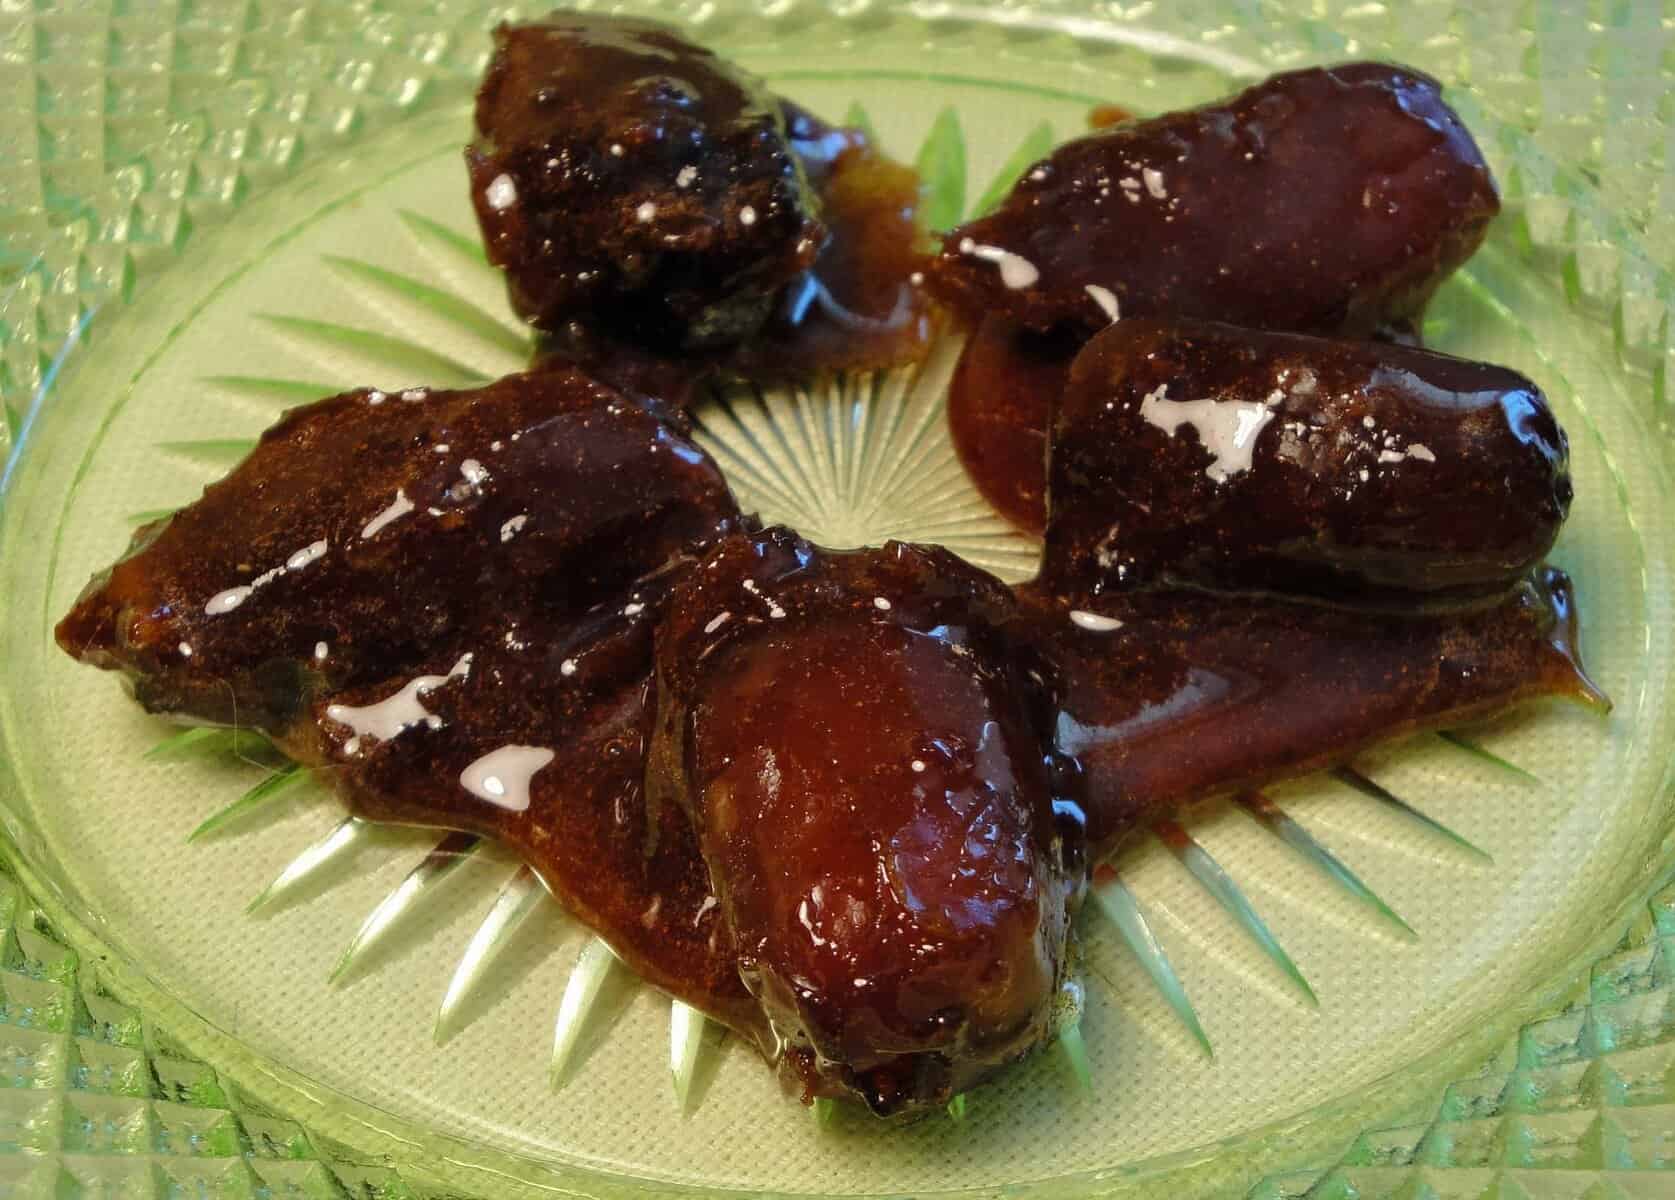  Sweet and nutty: Almond Stuffed Dates are a delightful treat!